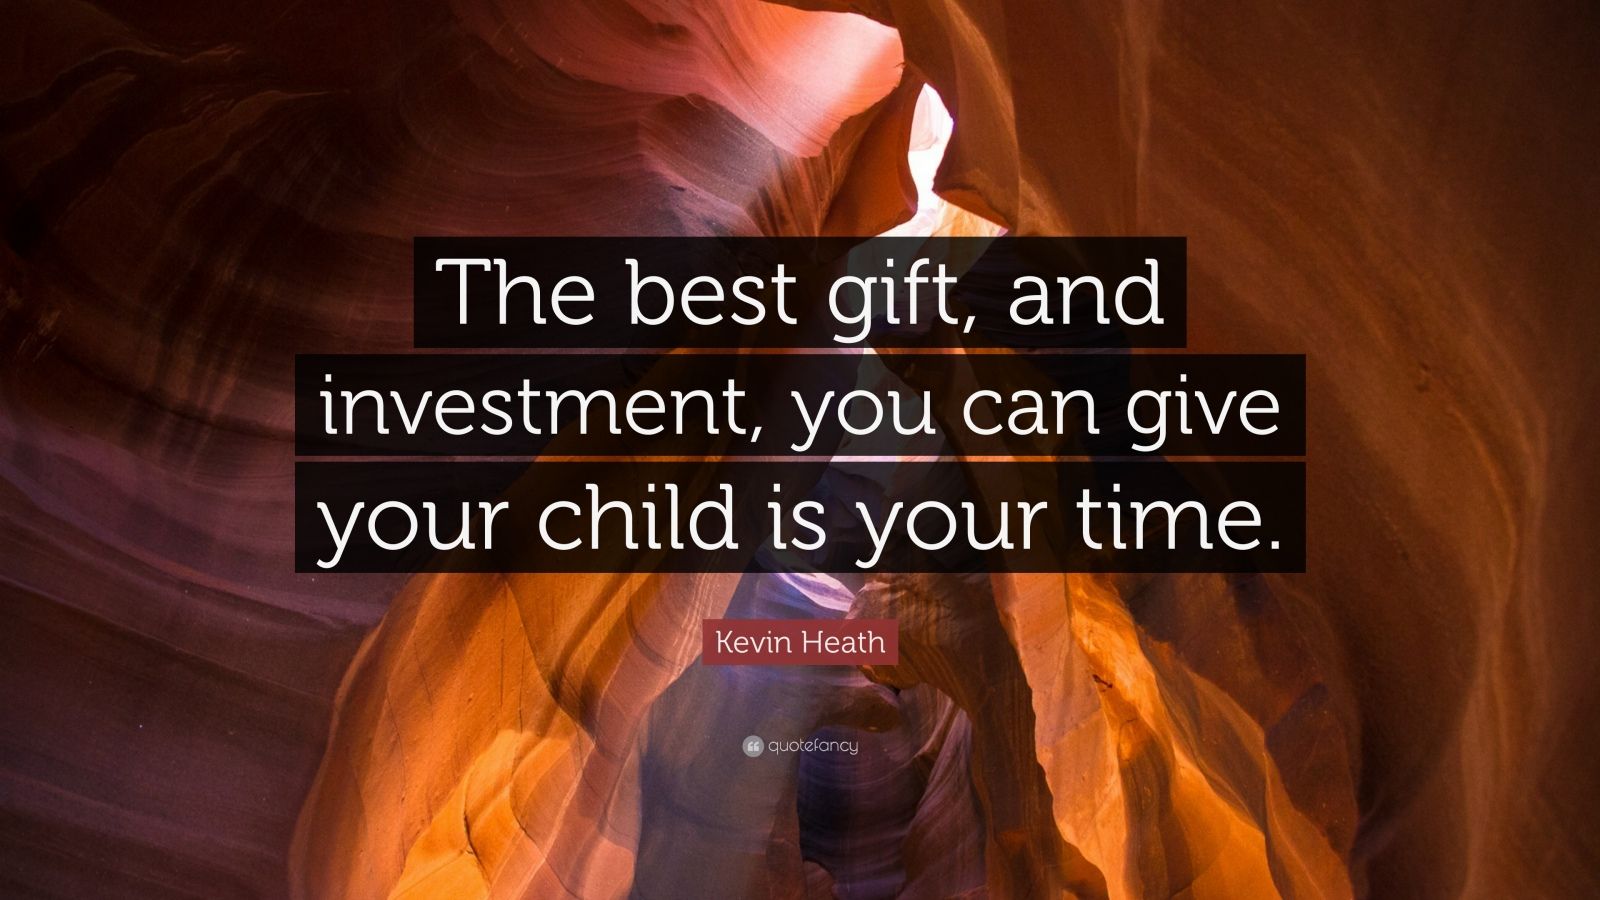 the ultimate gift quotes